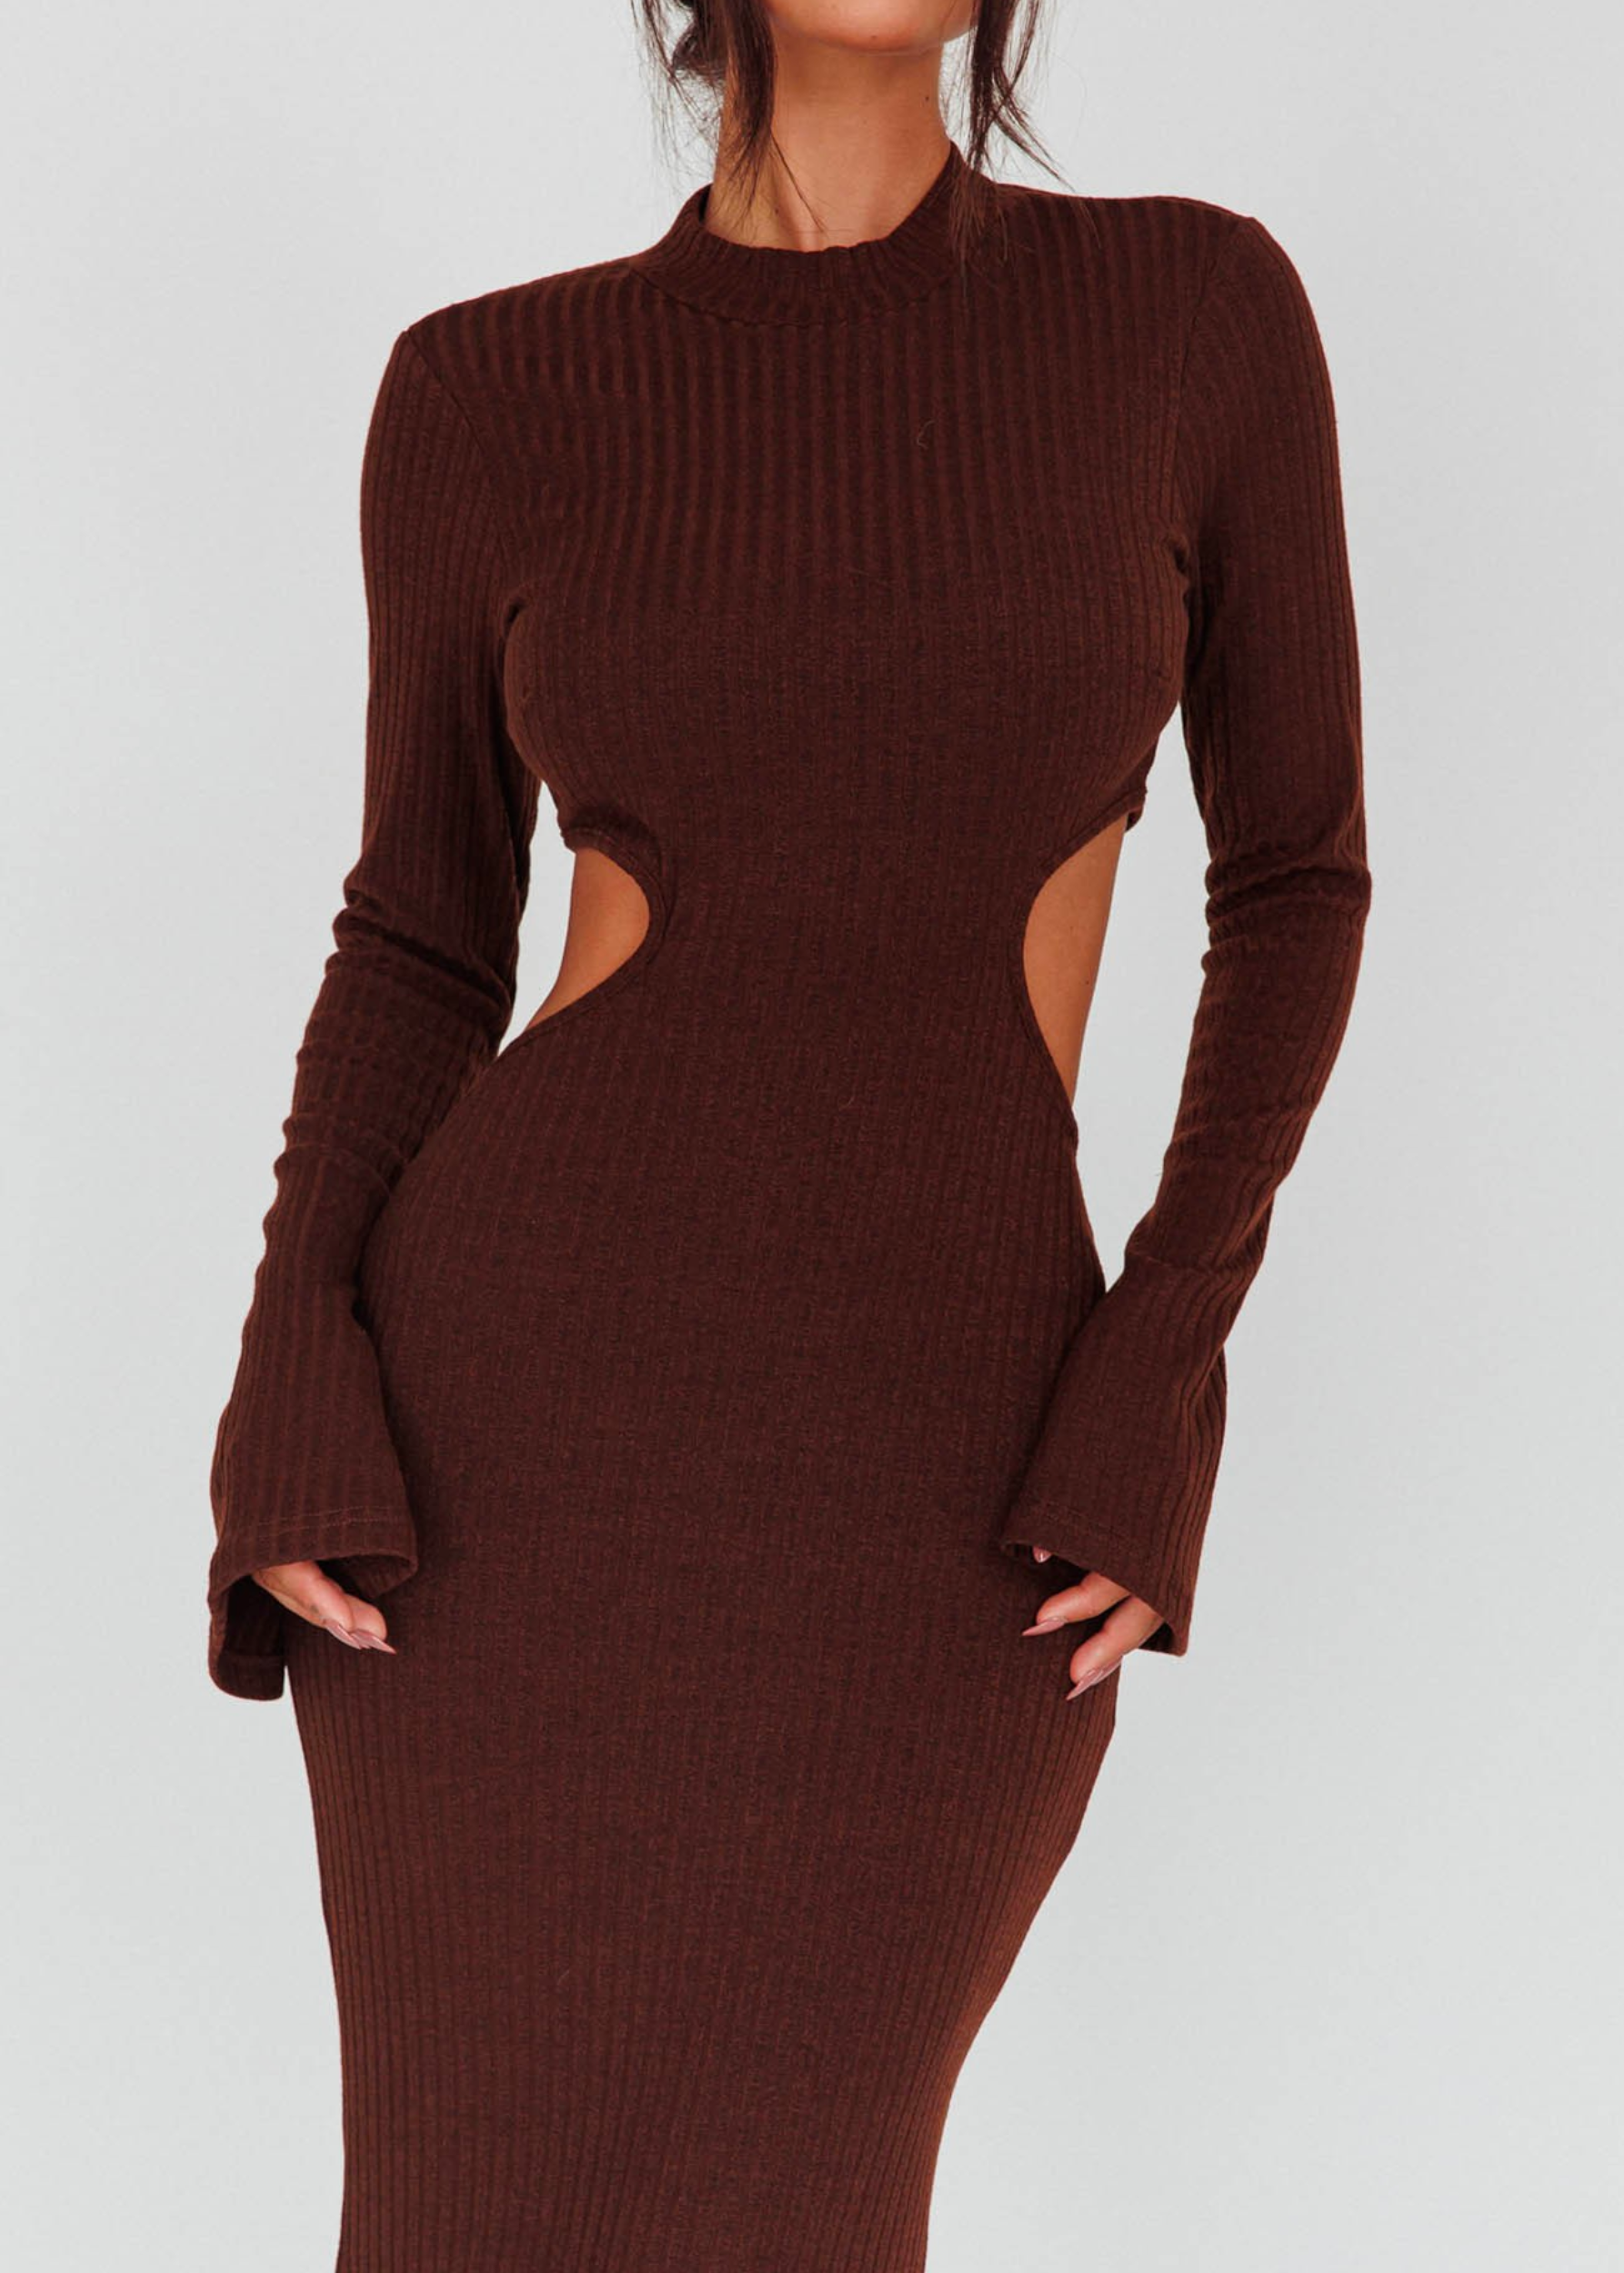 Long Sleeves with flared Cuffs Knit Maxi Dress